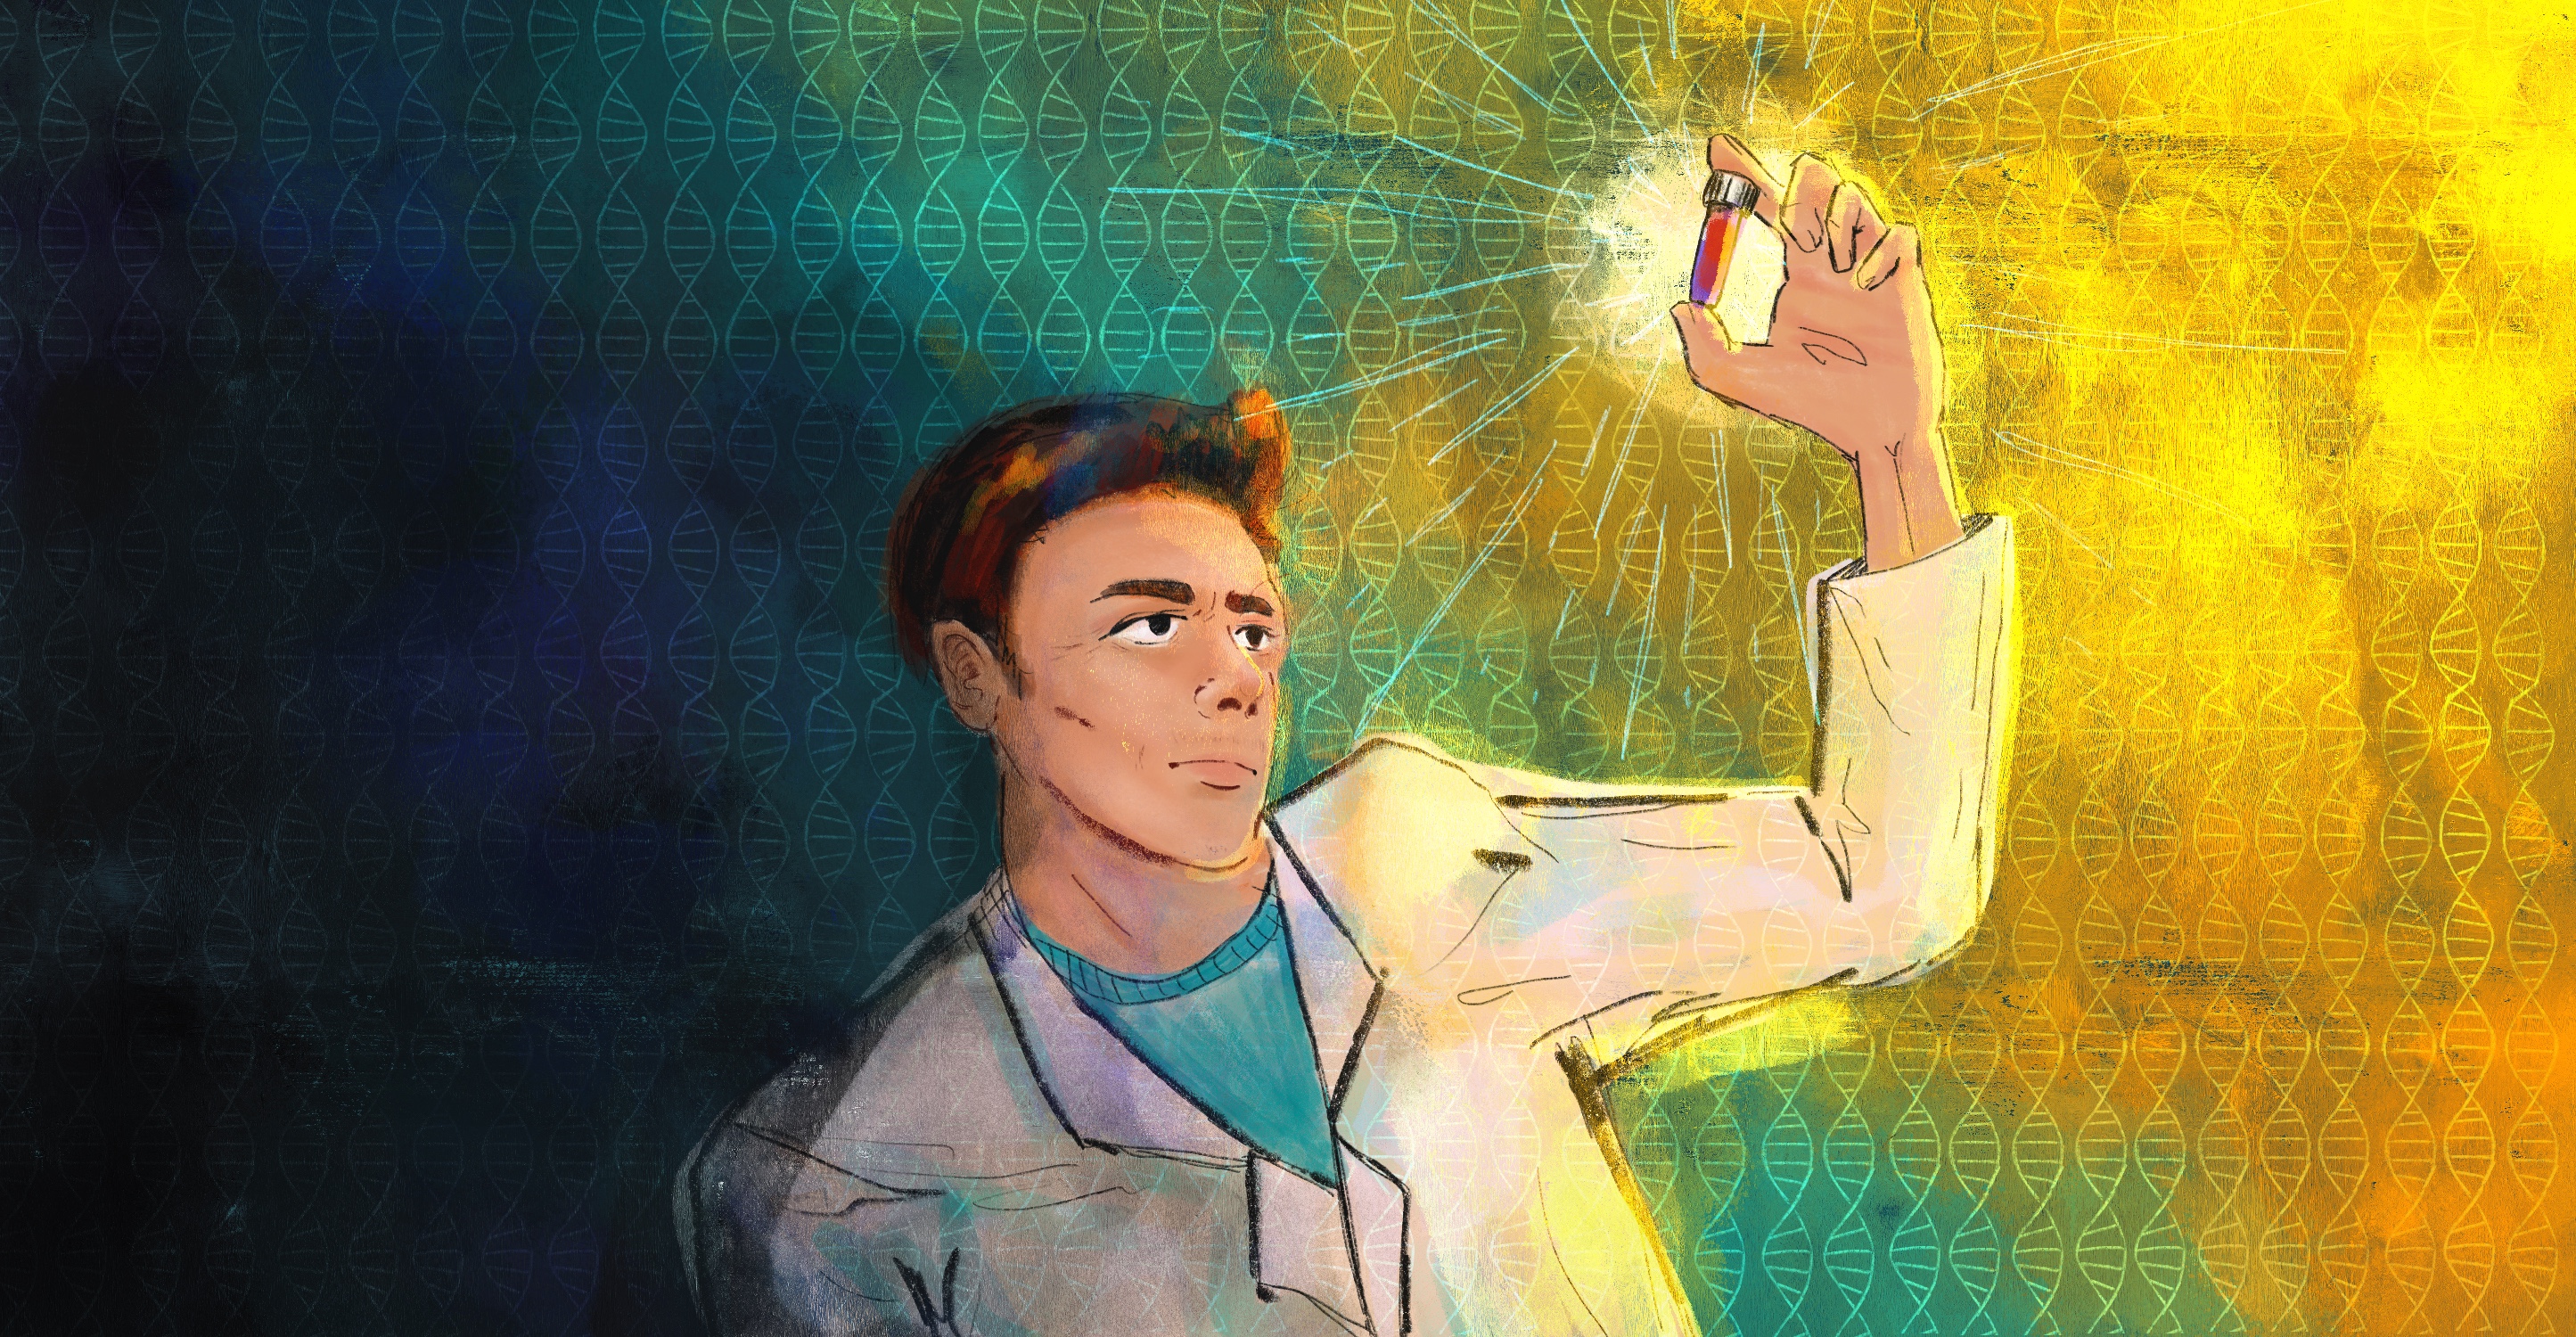 A digital illustration in watercolor and pencil. A Native American researcher, wearing a white lab coat, holds up a vial to light in order to examine it. Bright golds surround the vial, which gradually fades to shadow at the outer edges of the frame.